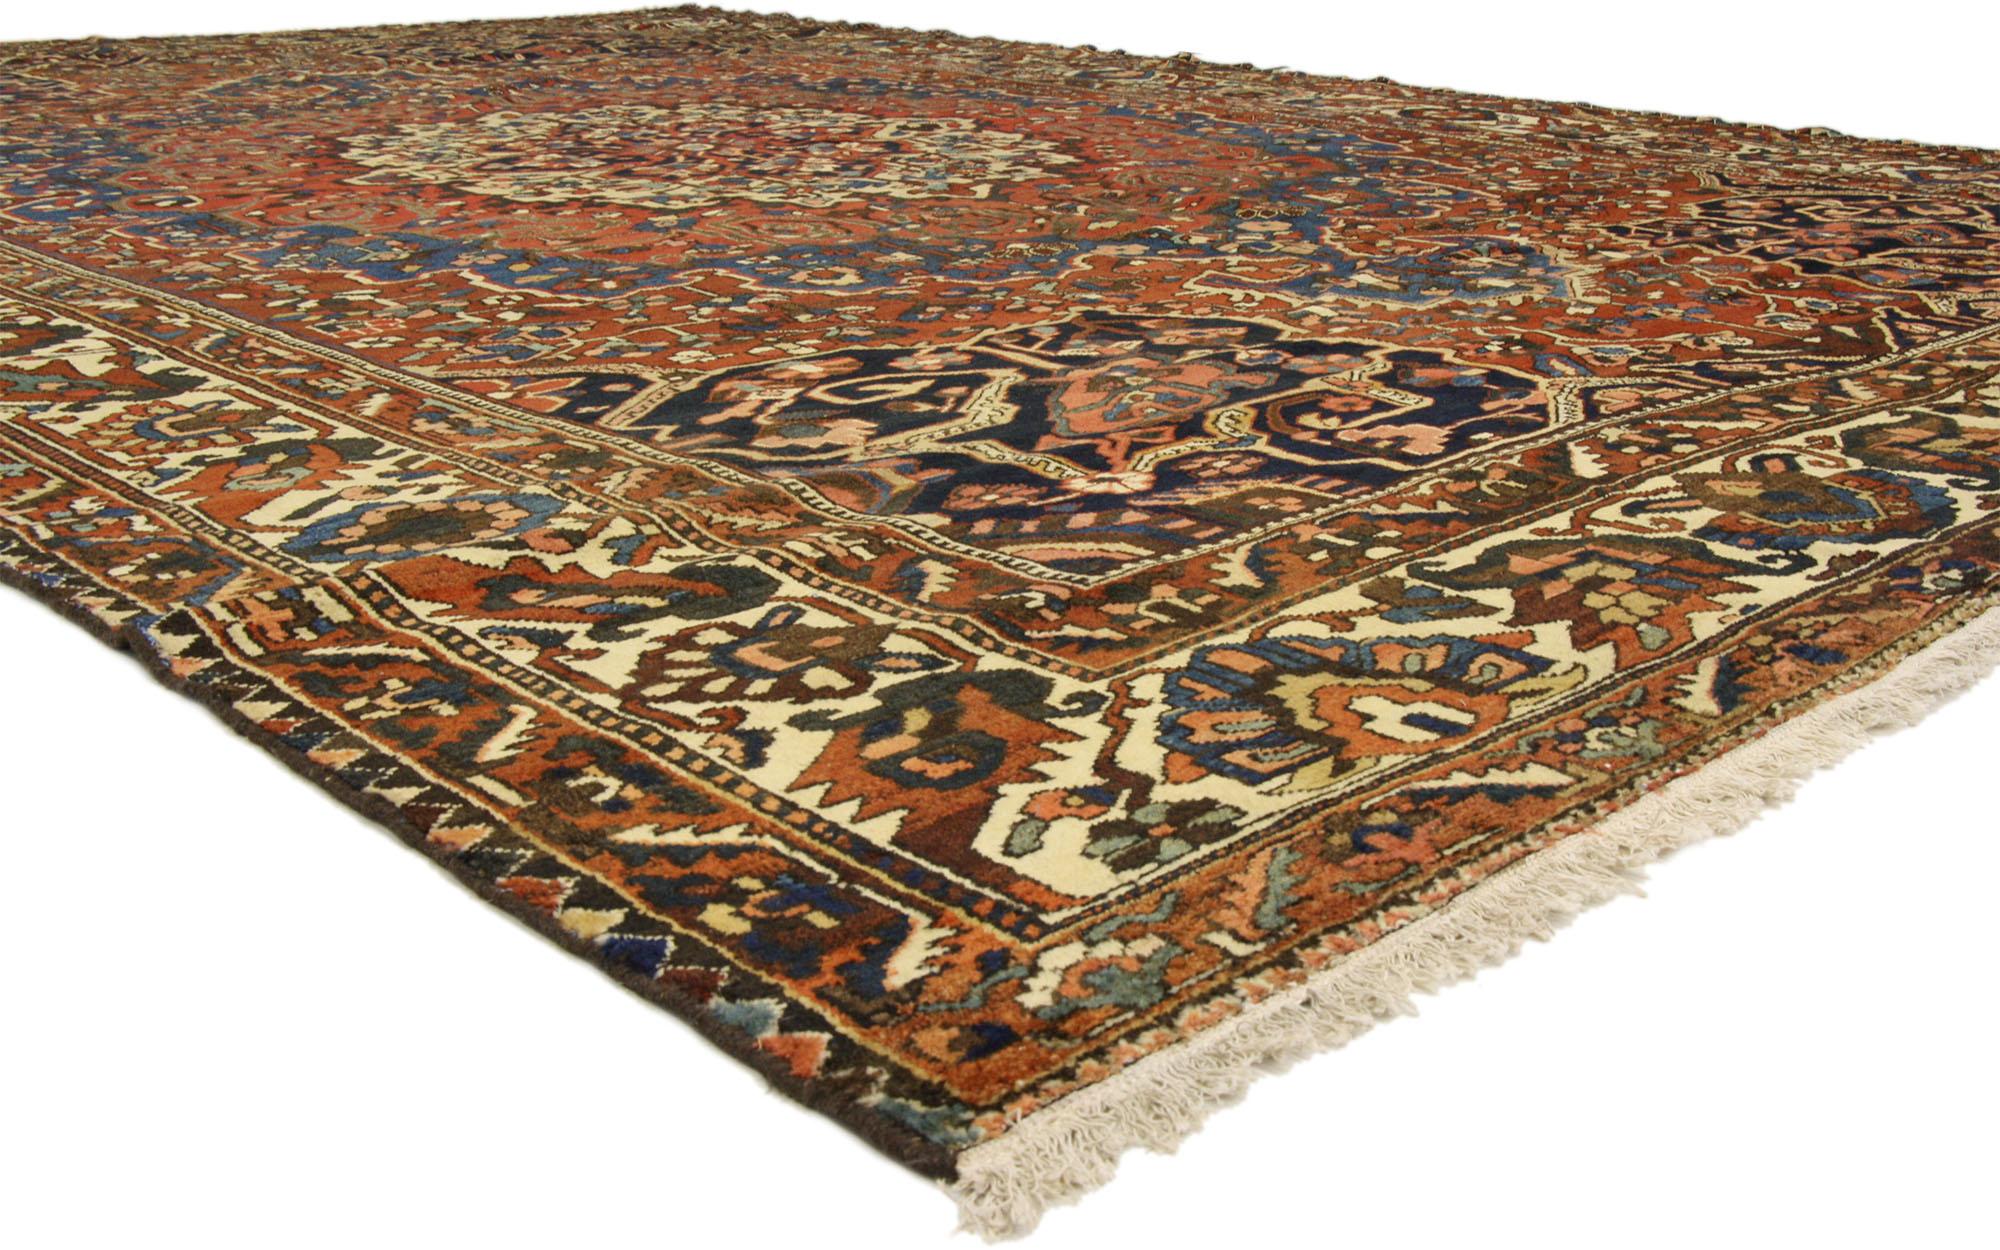 76567, antique Persian Bakhtiari rug with traditional modern style. Full of character and highly decorative, this antique Persian Bakhtiari rug with Traditional Modern style features an elaborate centre medallion and ornate spandrels surrounded by